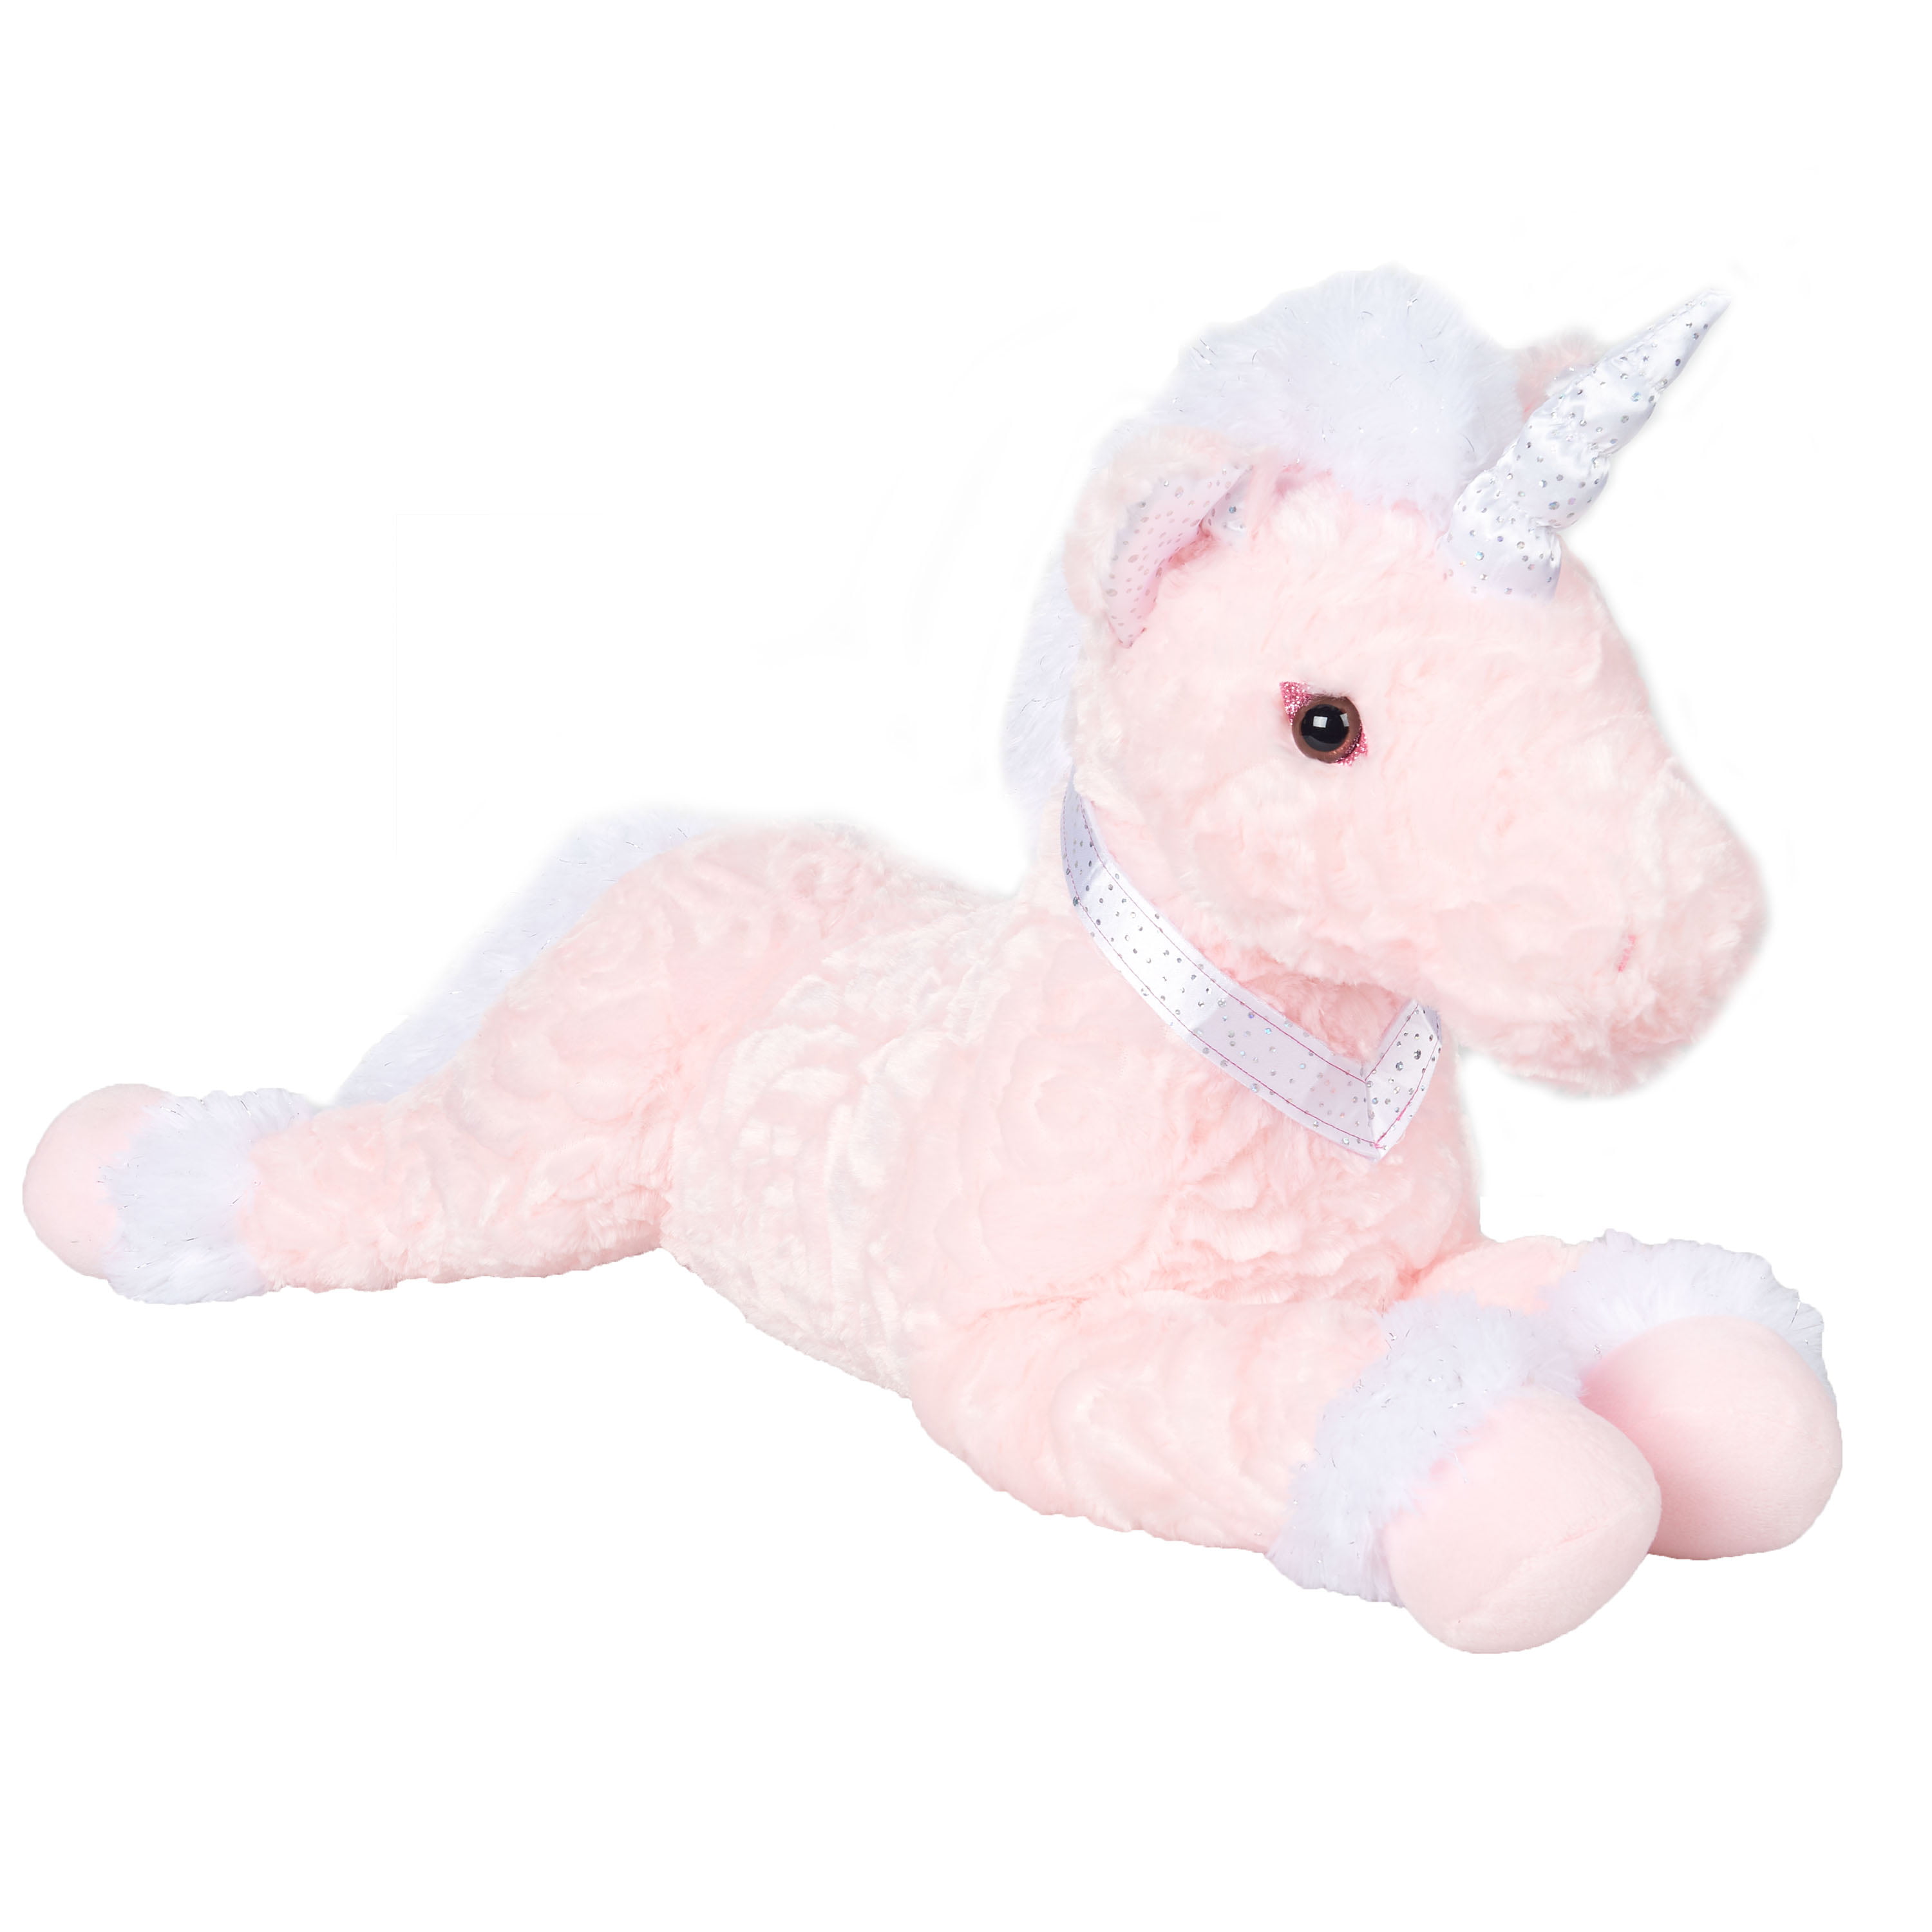 meowtastic Unicorn Stuffed Animal Pink 27 Inches Party Favors Gift Ideas Home Decor